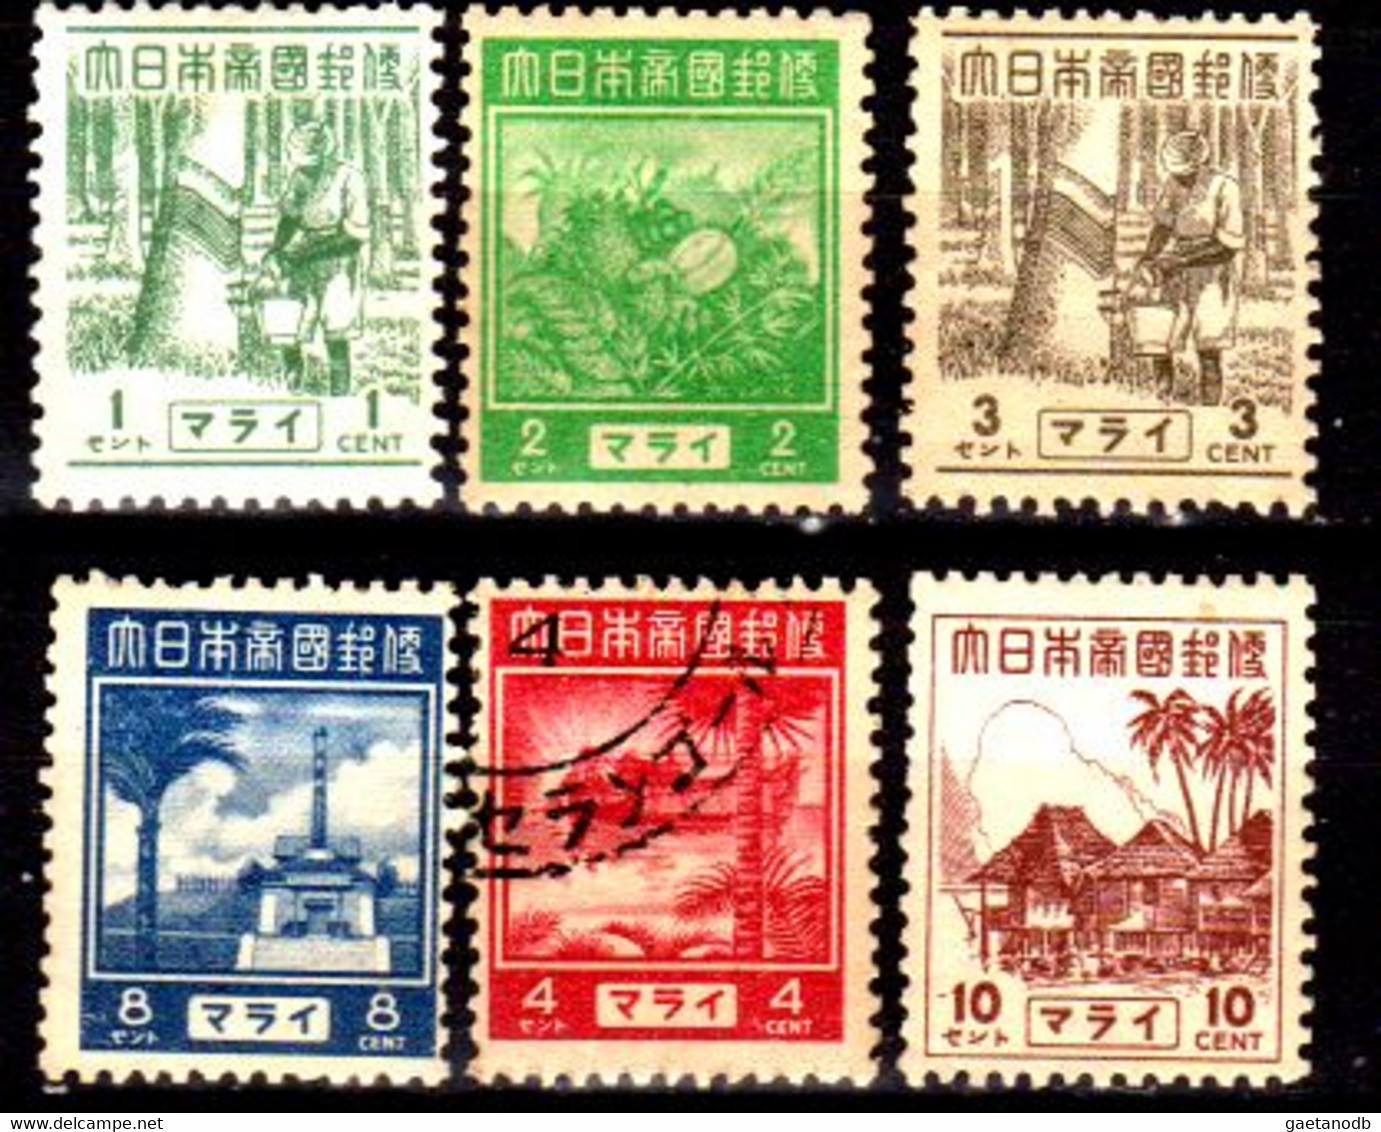 Malesia 1 - Jappanase Occupation 1943 (+/o) LH/Used - Quality In Your Opinion. - Japanisch Besetzung